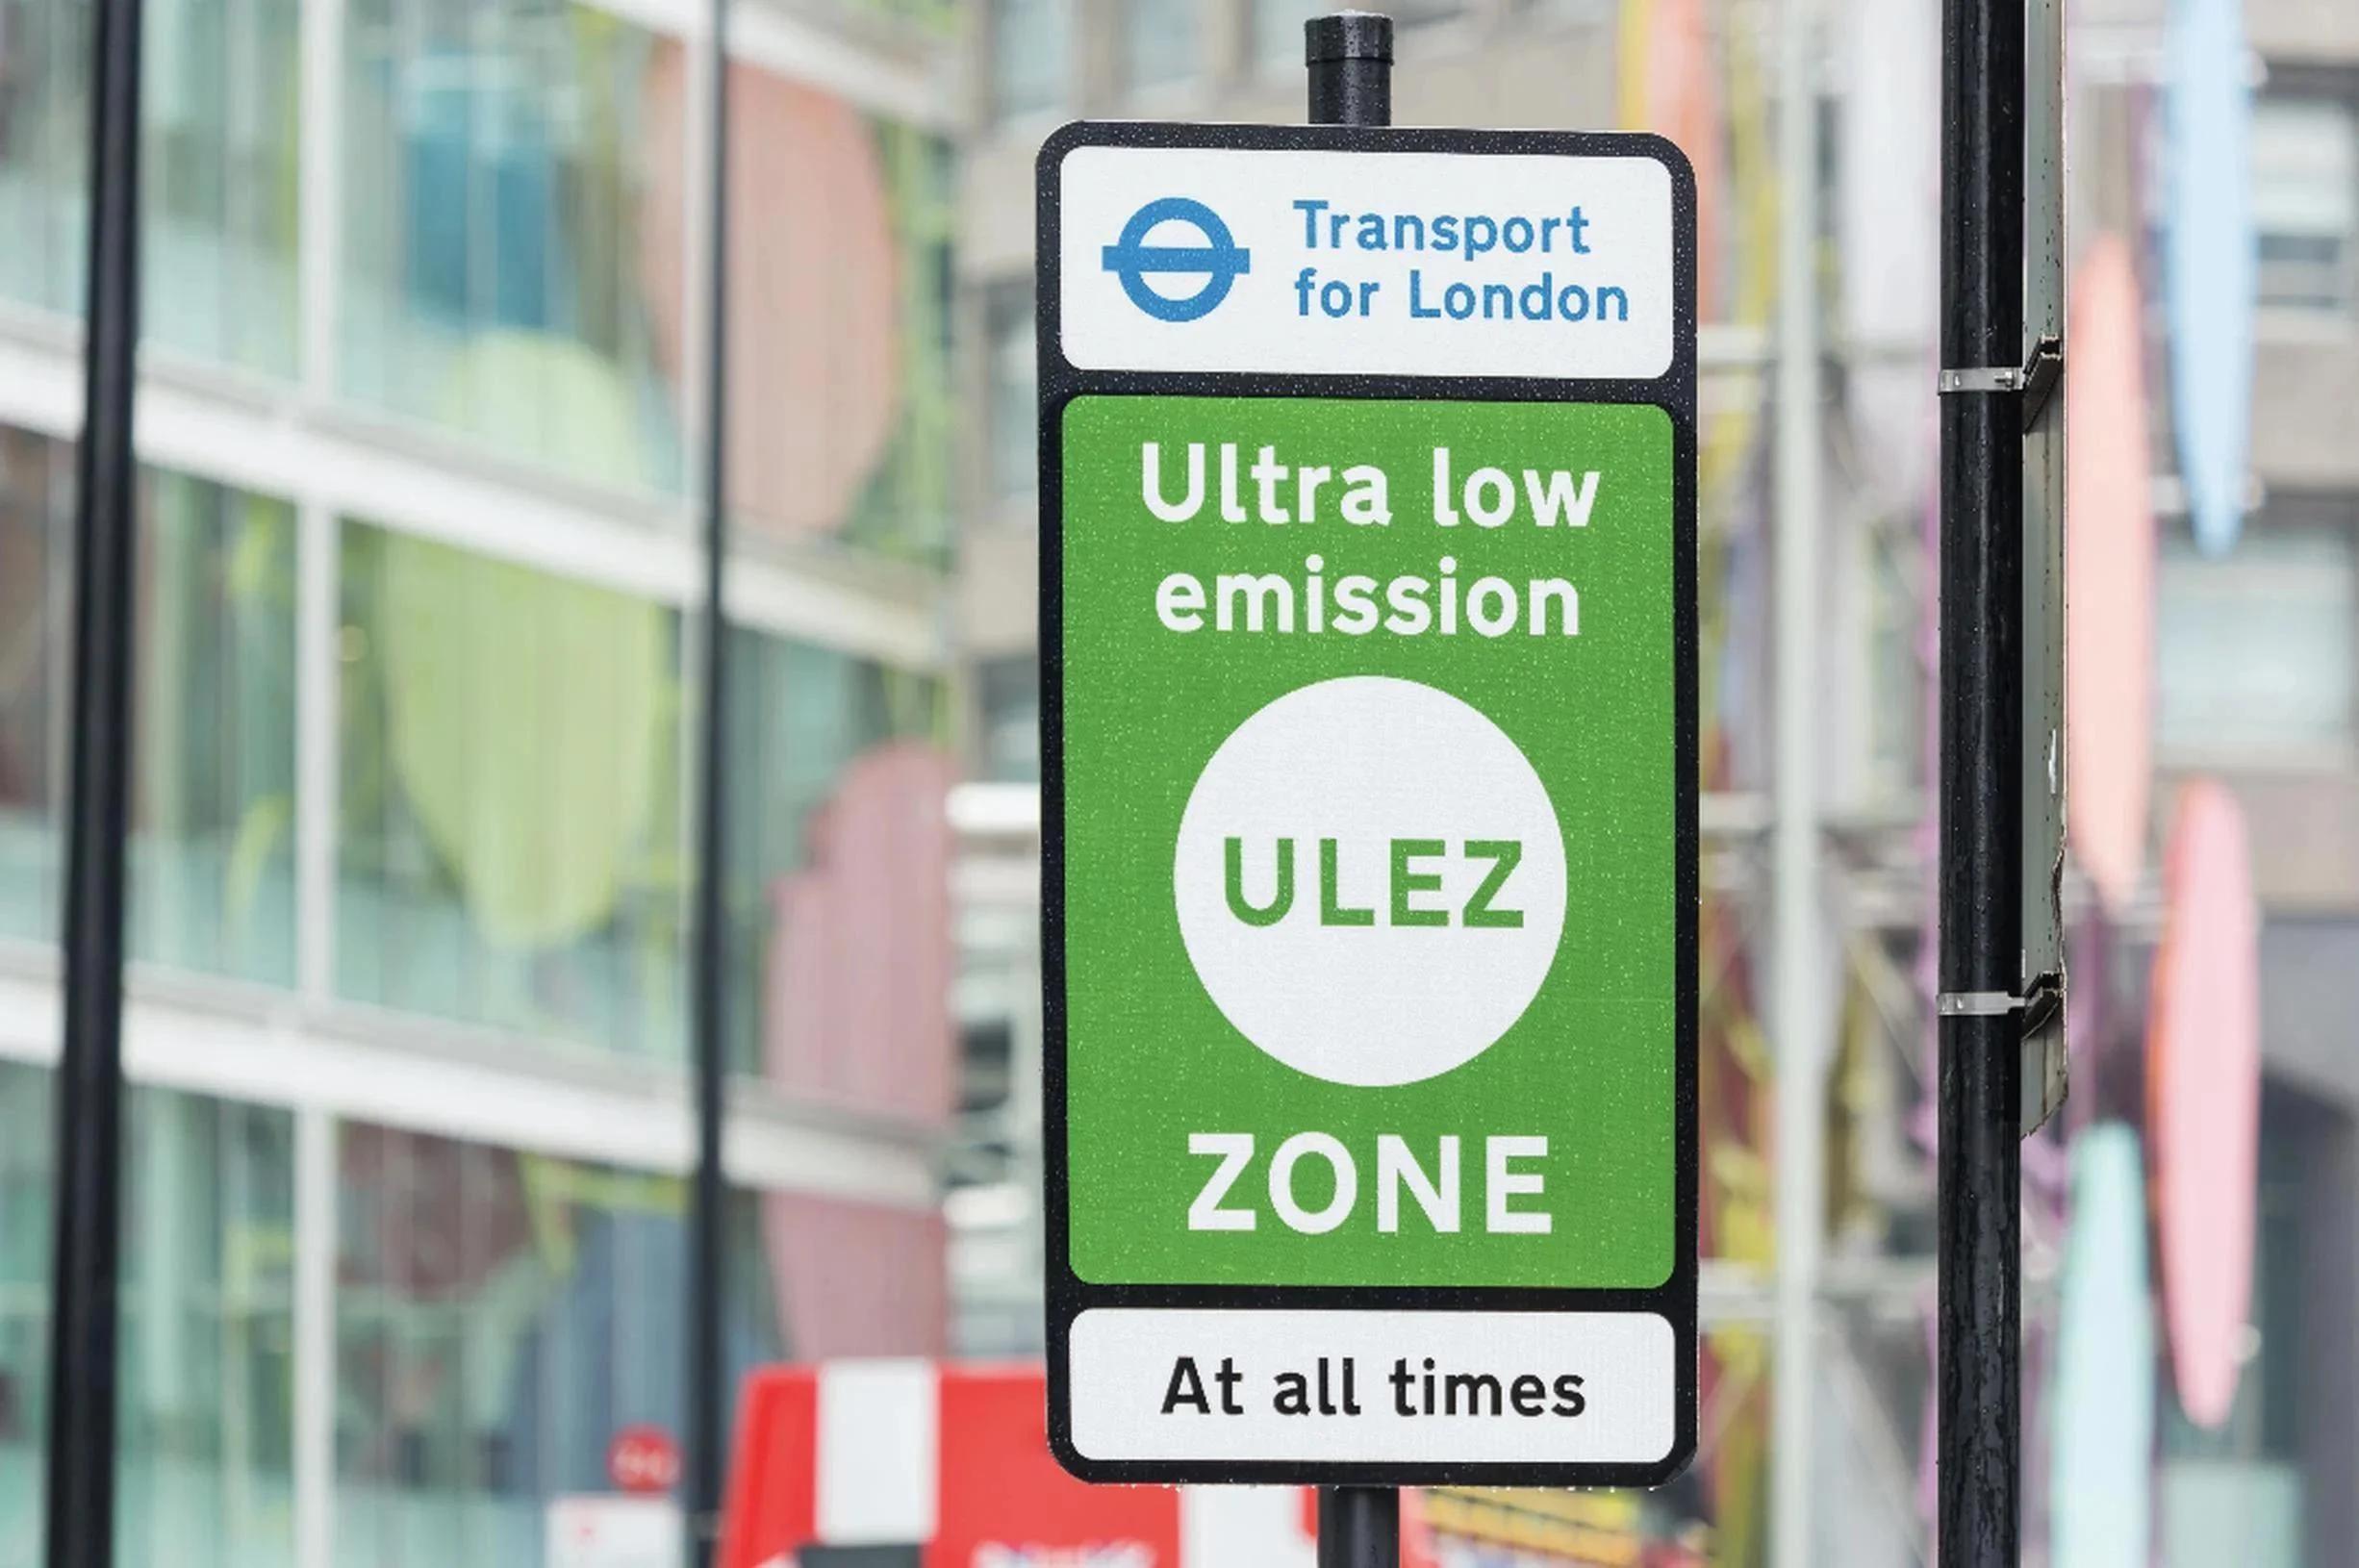 Of those against schemes such as ULEZ, 77% said people cannot afford to upgrade their cars